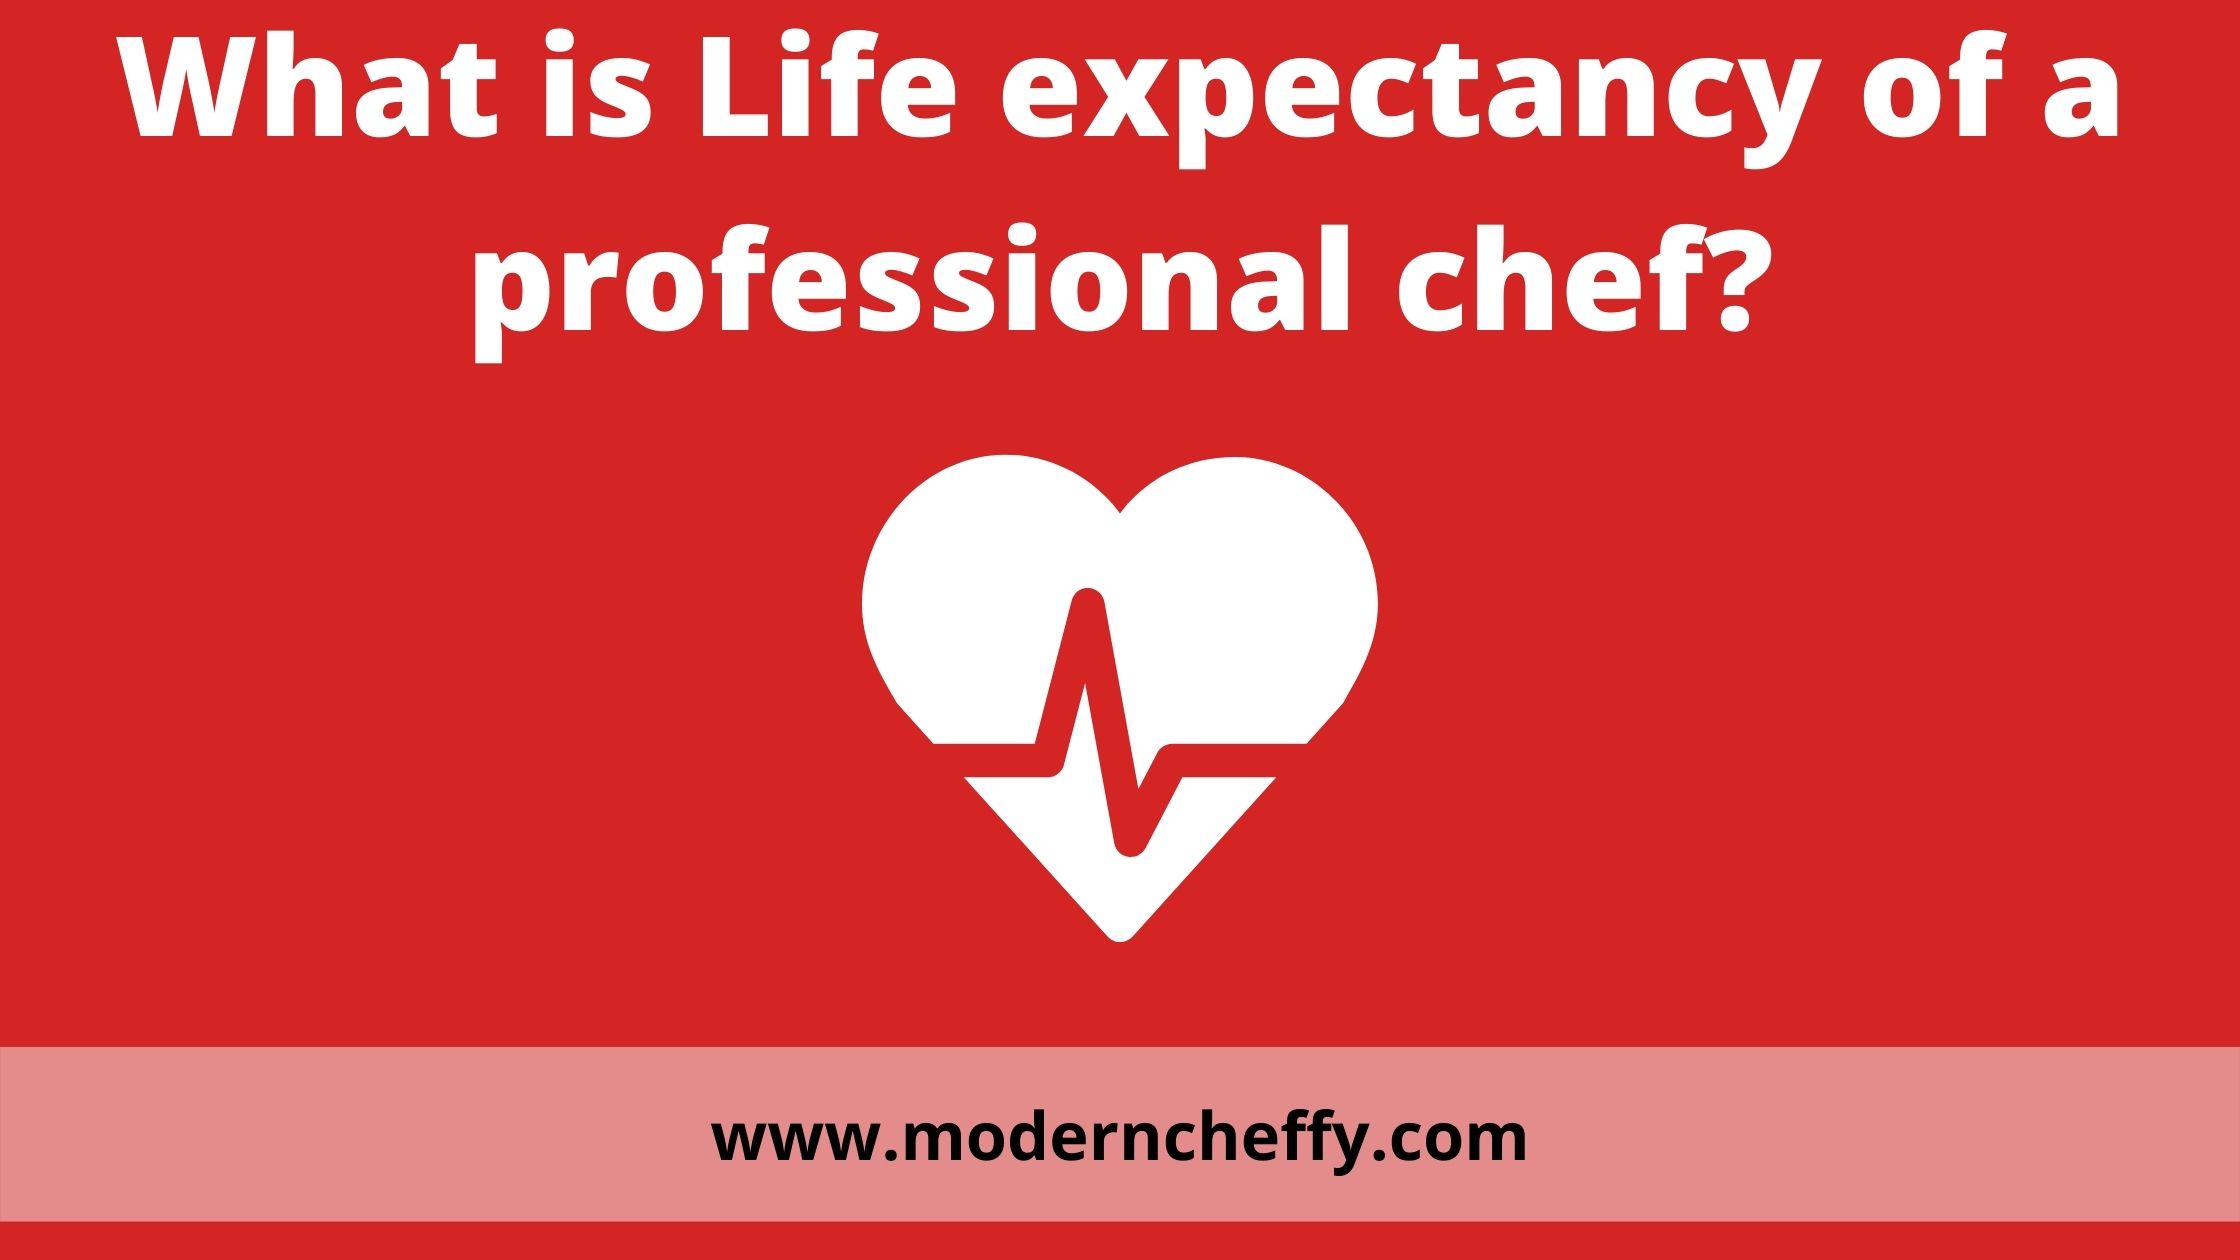 What is Life expectancy of a professional chef